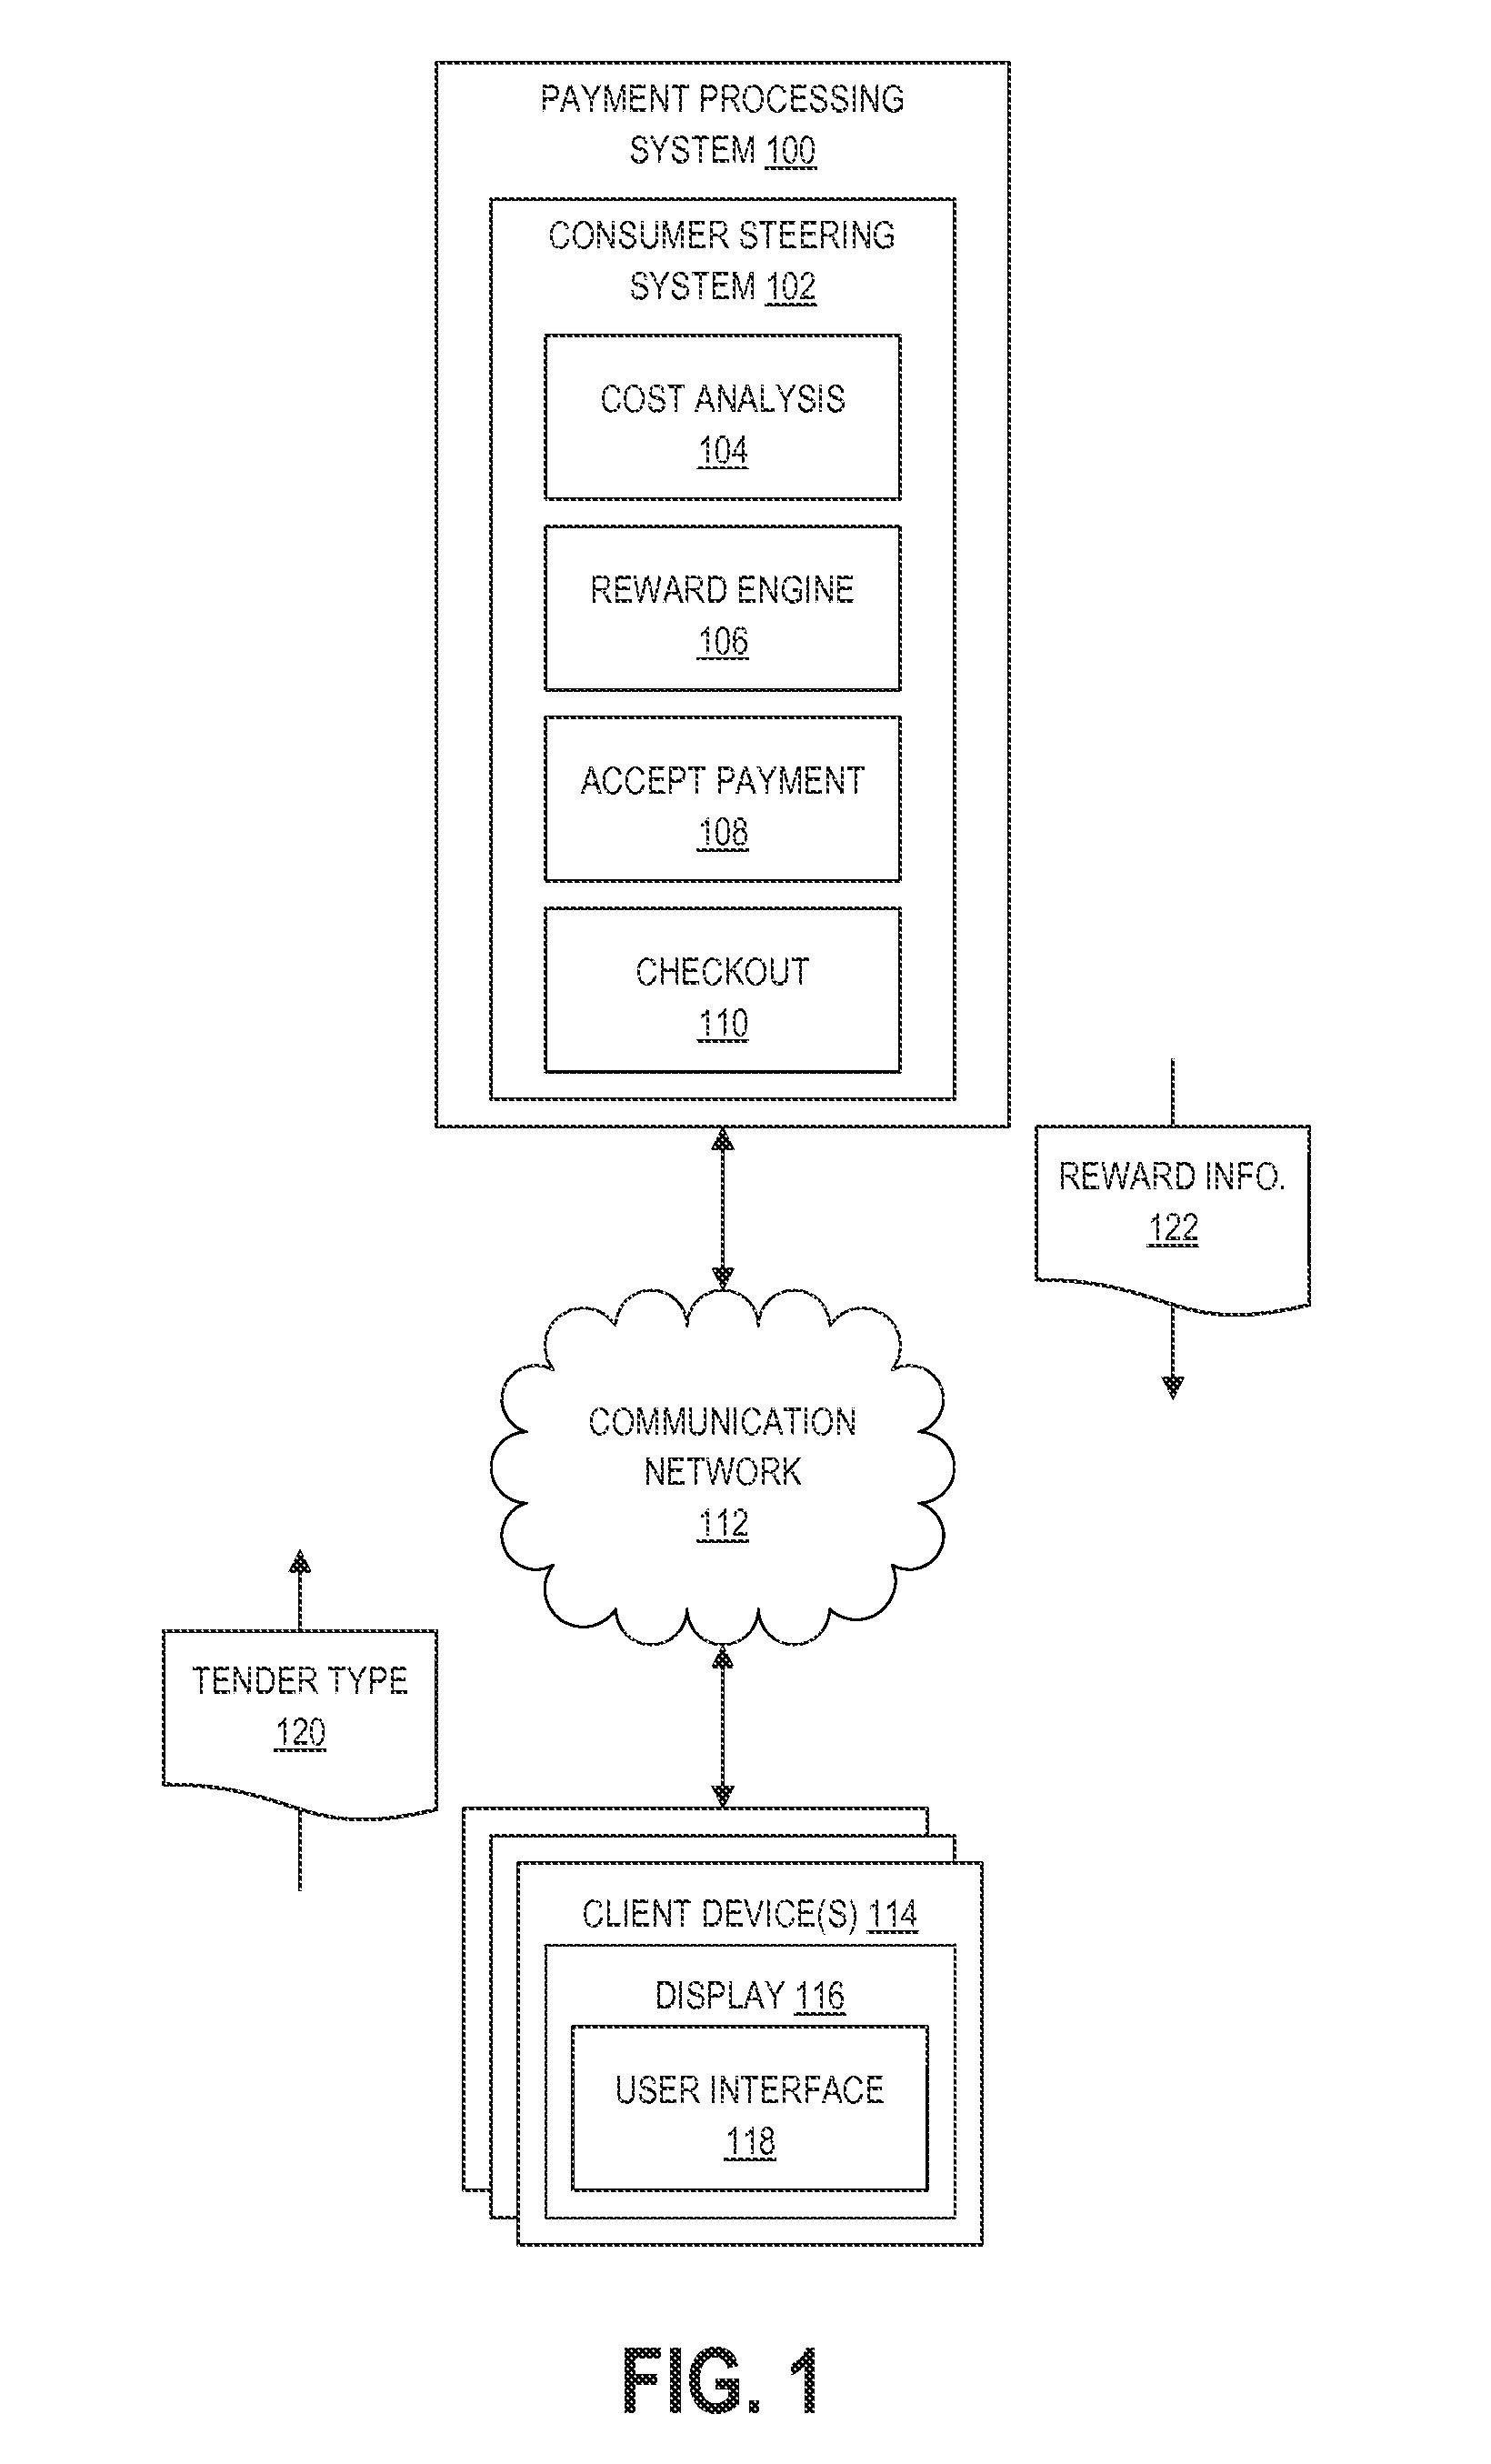 Systems and methods for consumer steering based on real-time transaction cost information